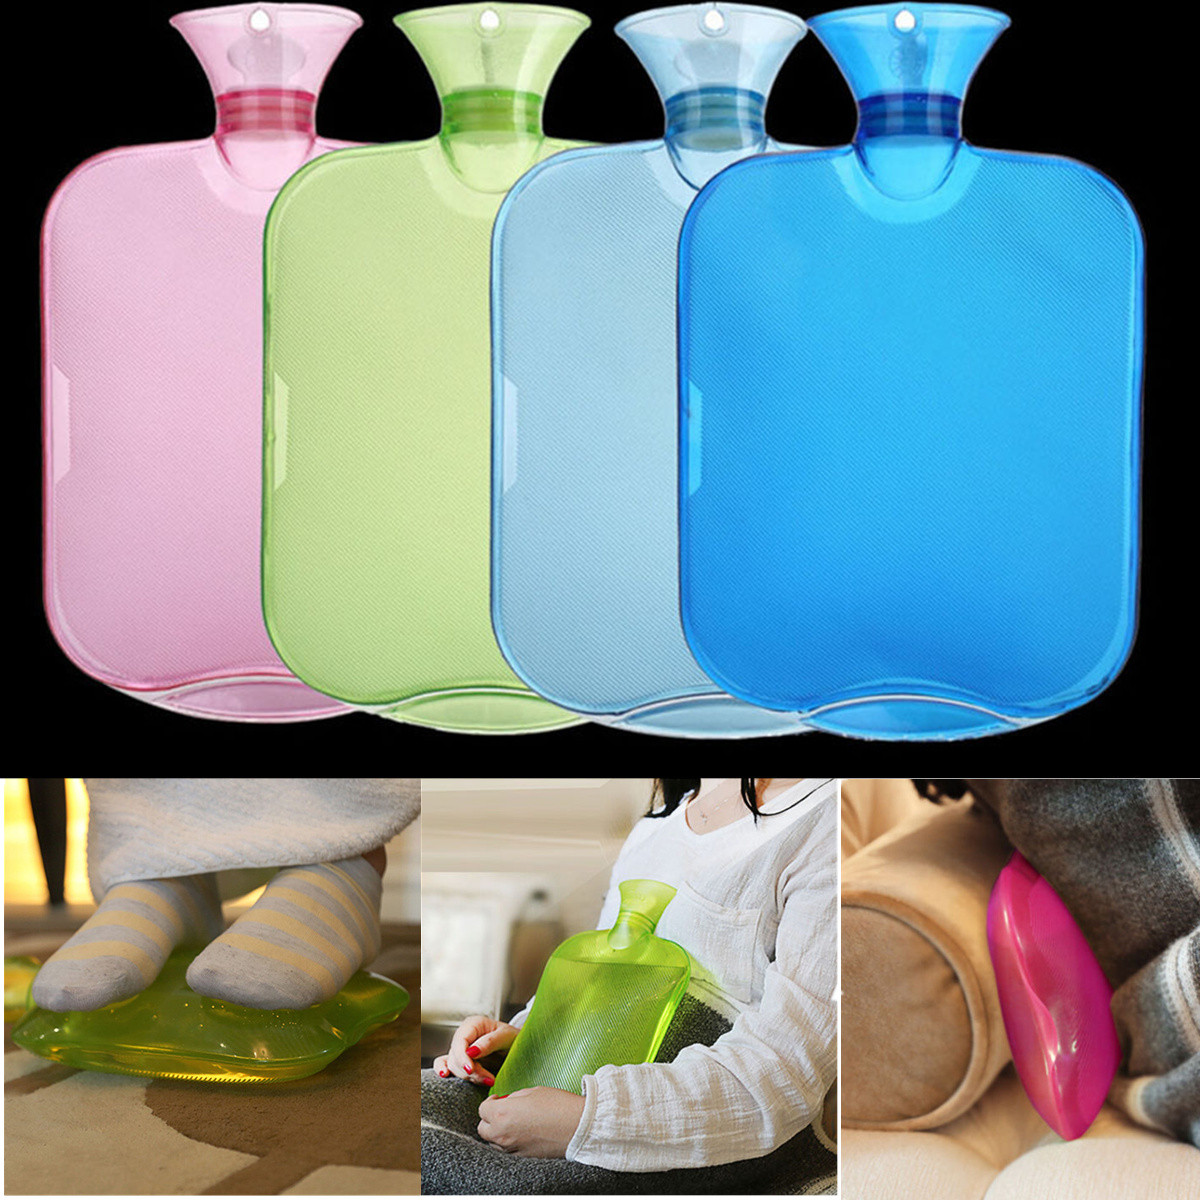 

2000ml PVC Rubber Hot Water Bottle Warm Relax Pain Sports Injuries Relief Heat Cold Therapy Bag